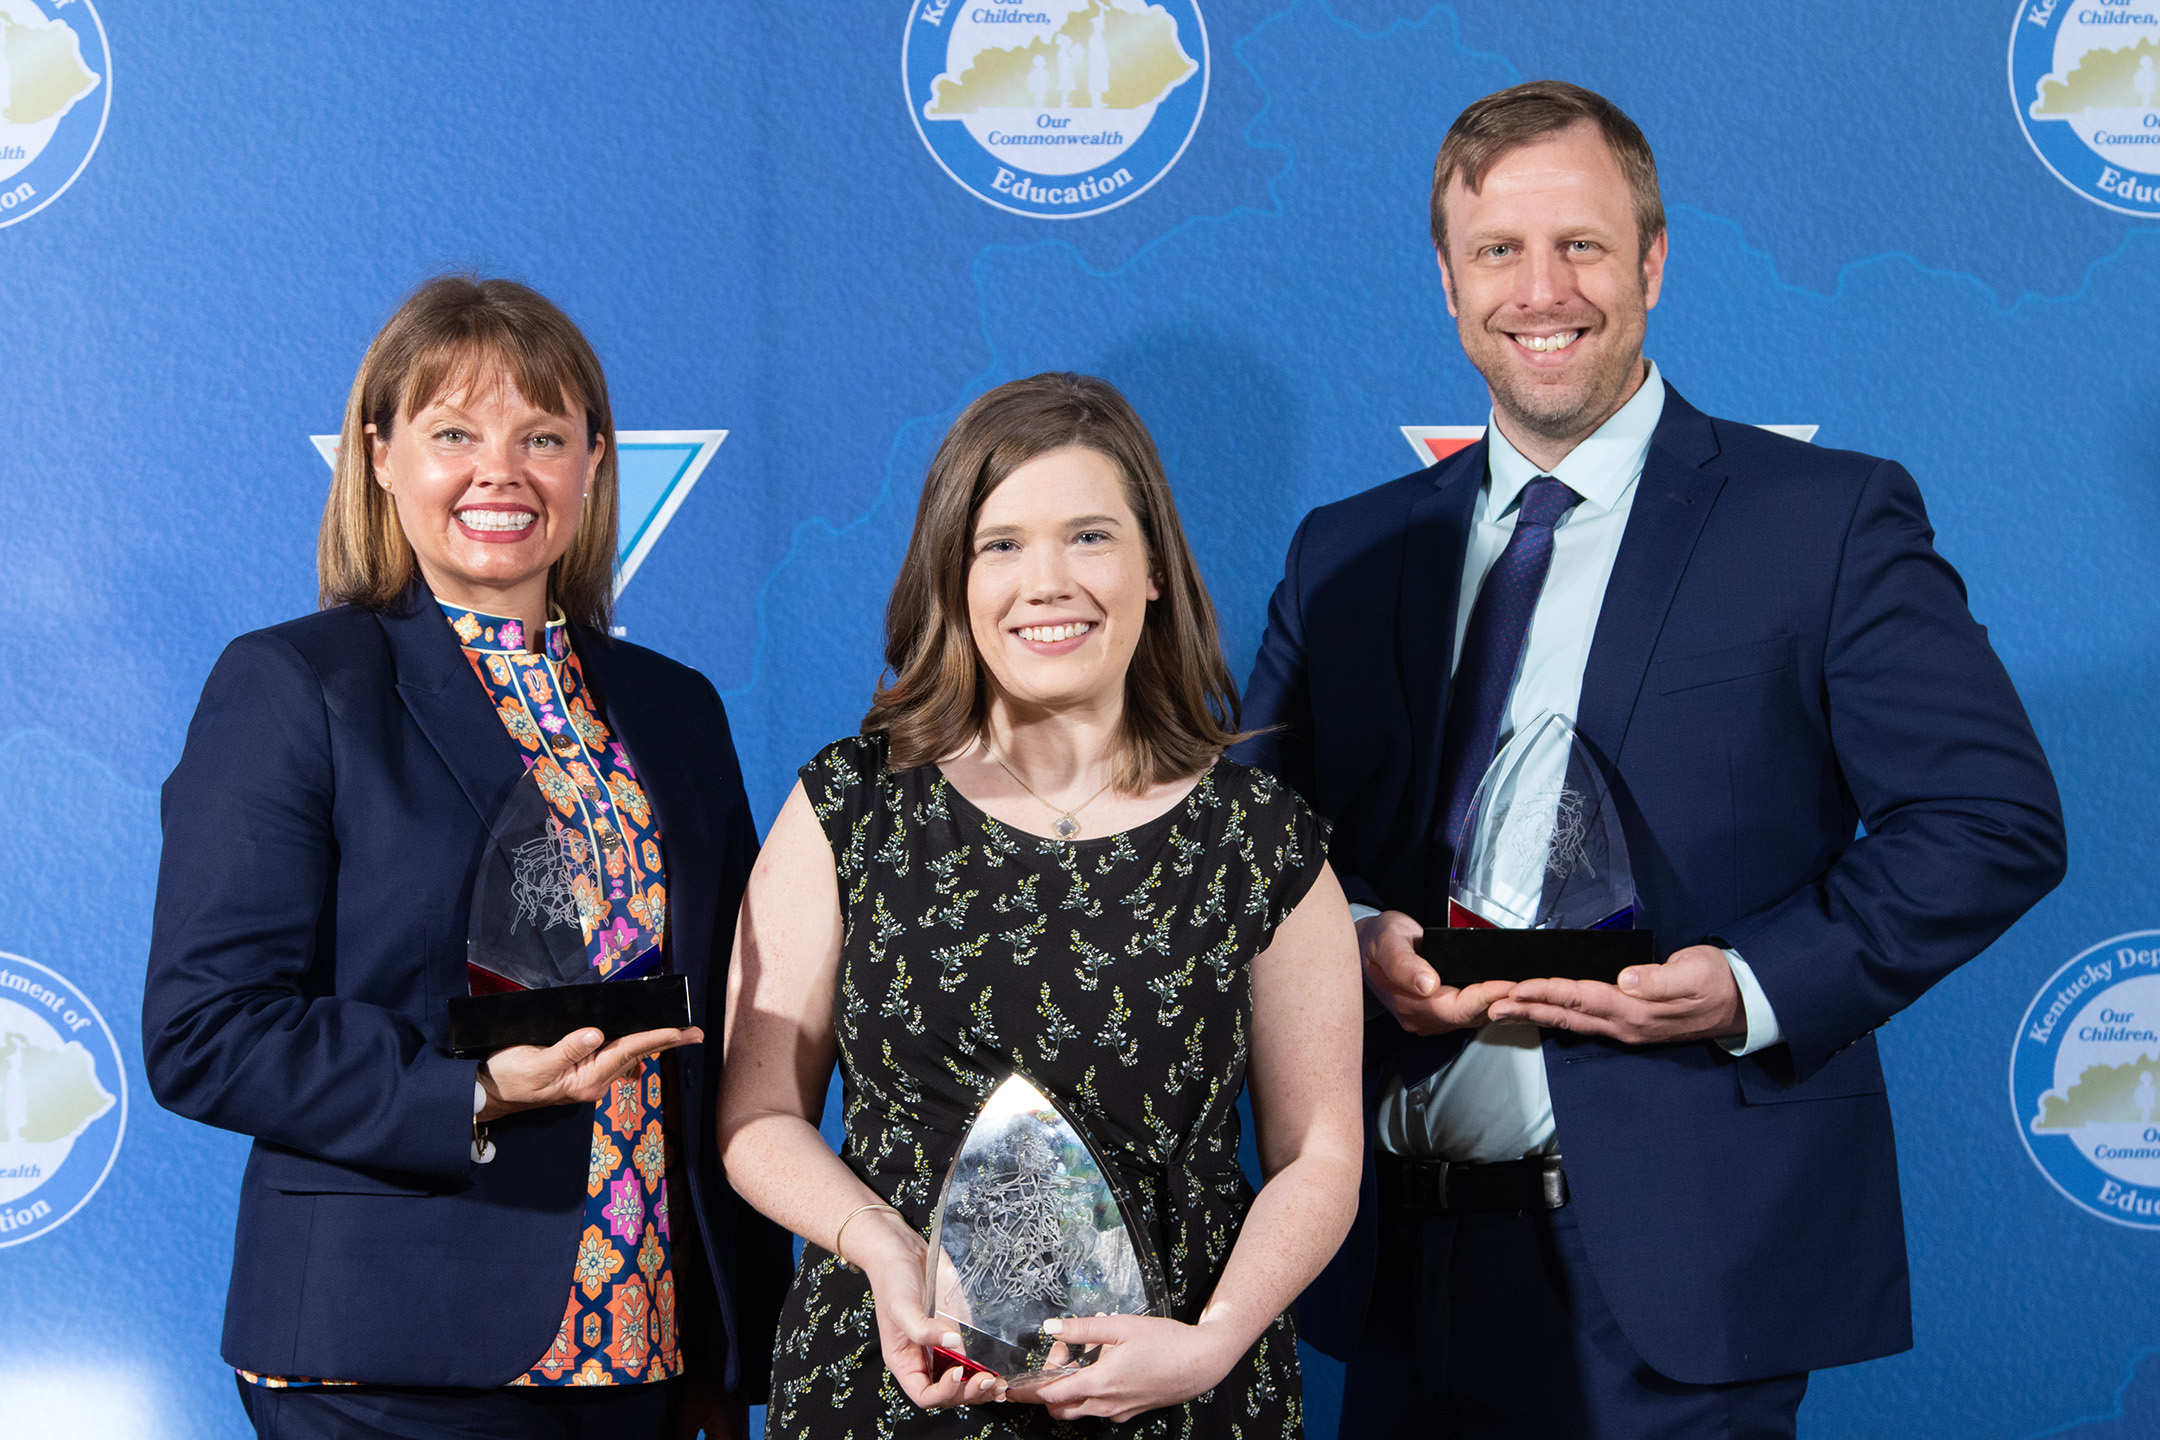 Erin Elizabeth Ball, center, a language arts teacher at Georgetown Middle School (Scott County), was named the 2020 Kentucky Teacher of the Year at a May 20 ceremony in Frankfort.